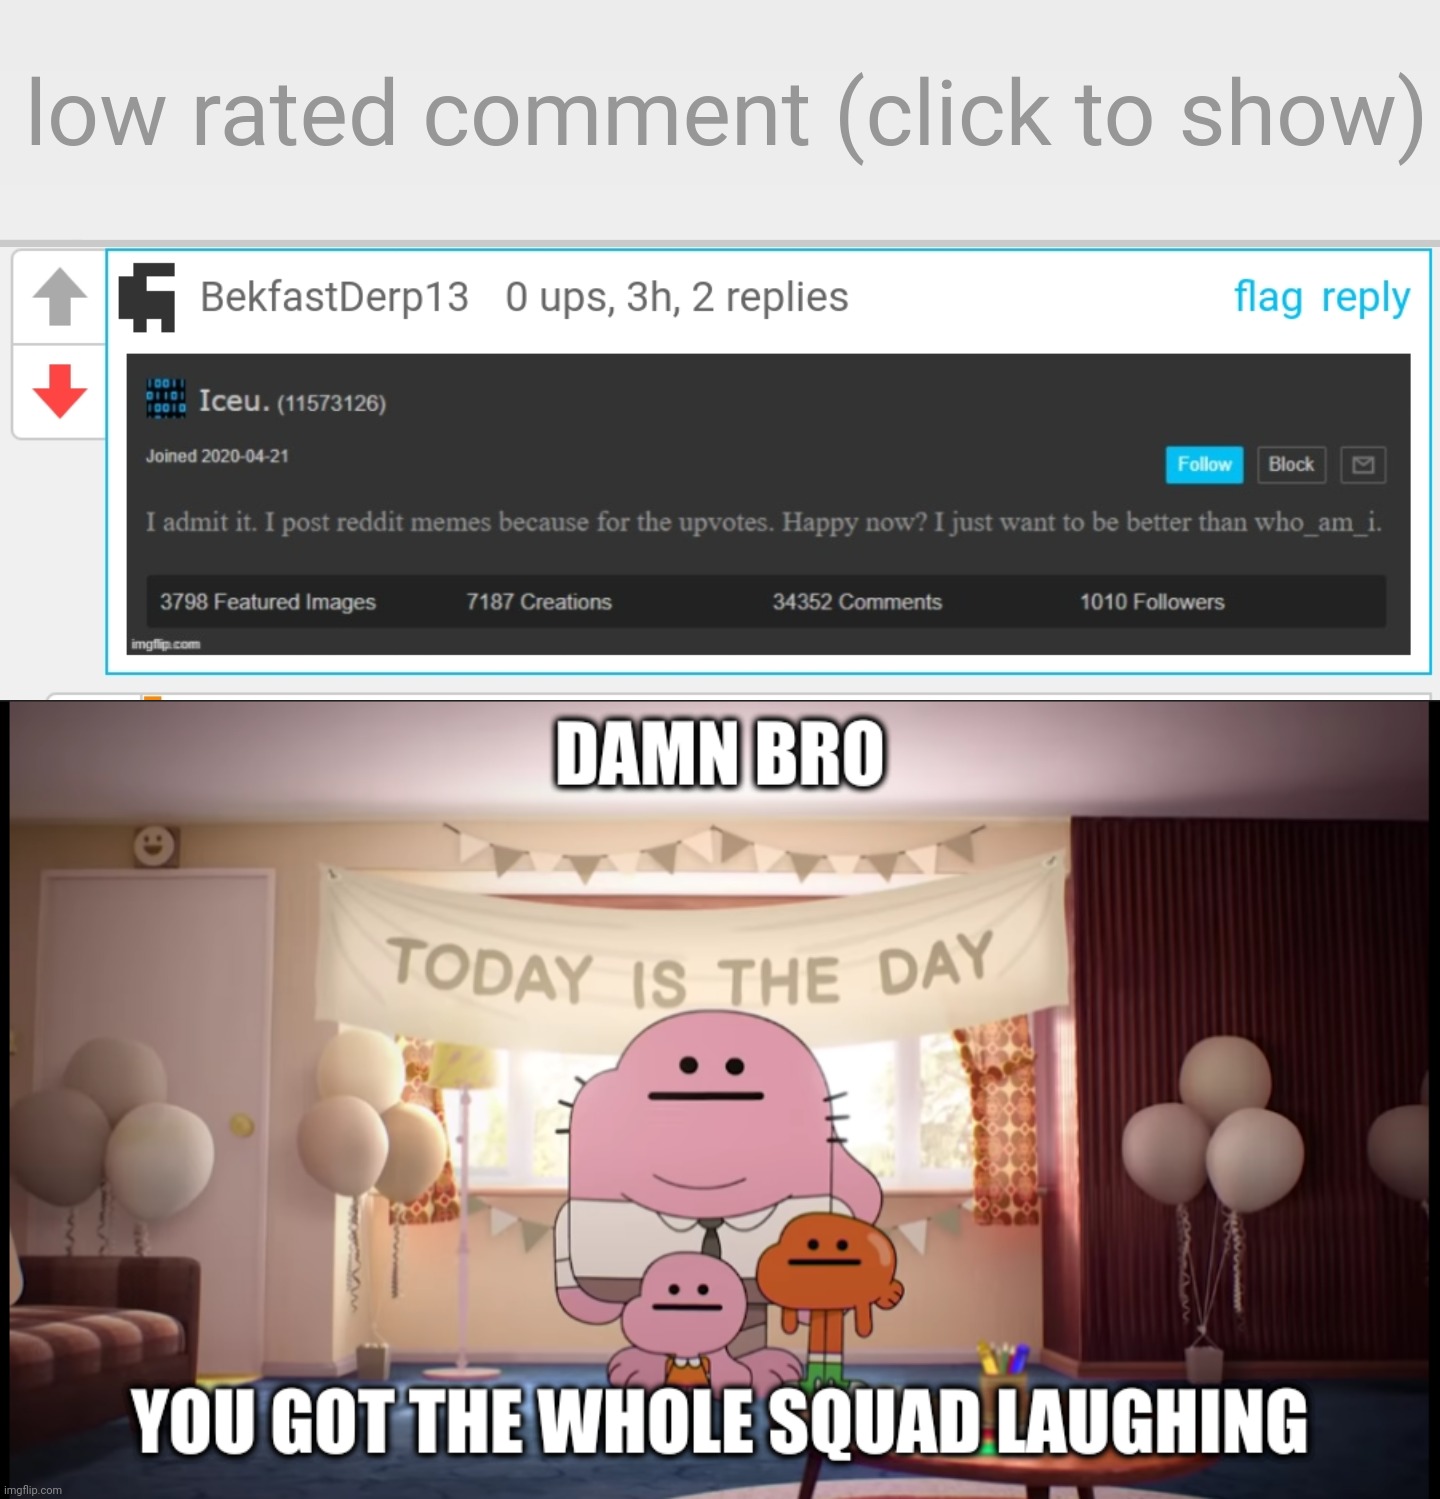 Really, Iceu-diss?! | image tagged in low-rated comment imgflip,damn bro you got the whole squad laughing | made w/ Imgflip meme maker